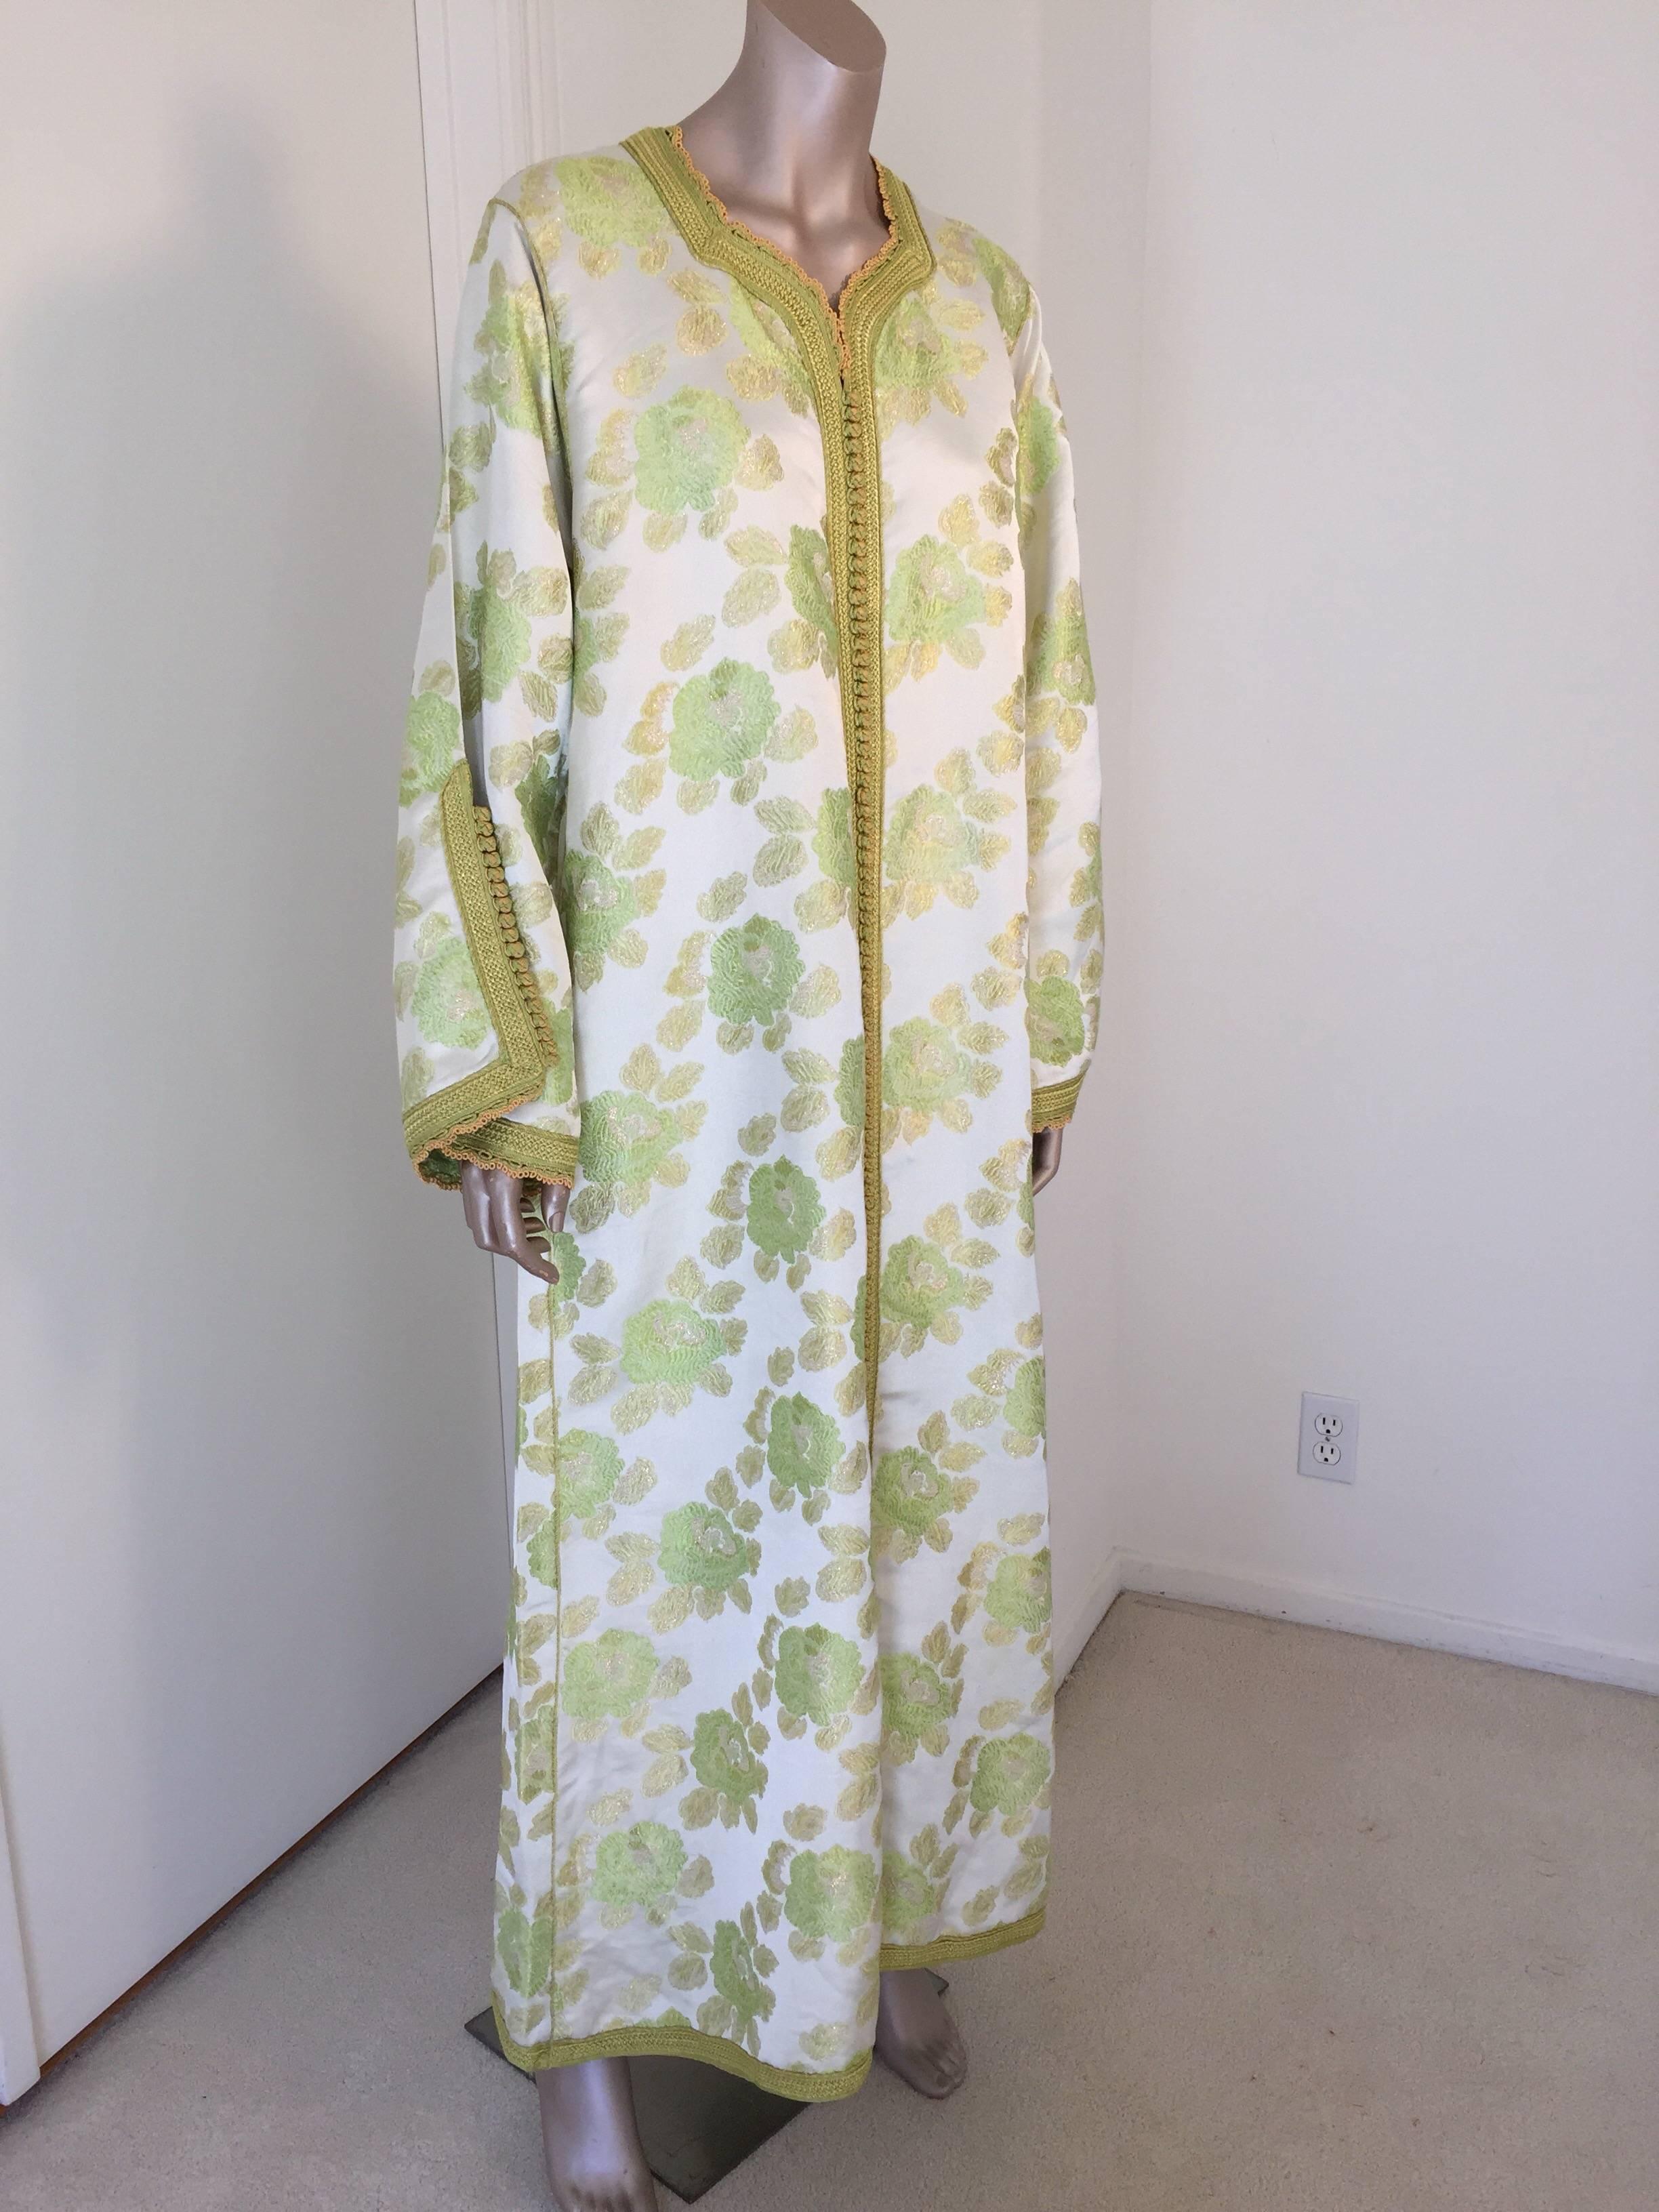 Moroccan caftan, evening or interior green and gold metallic floral brocade dress kaftan with gold and green trim.
Handmade vintage exotic 1970s metallic green brocade caftan gown, ceremonial Kaftan from North Africa, Morocco.
The luminous green